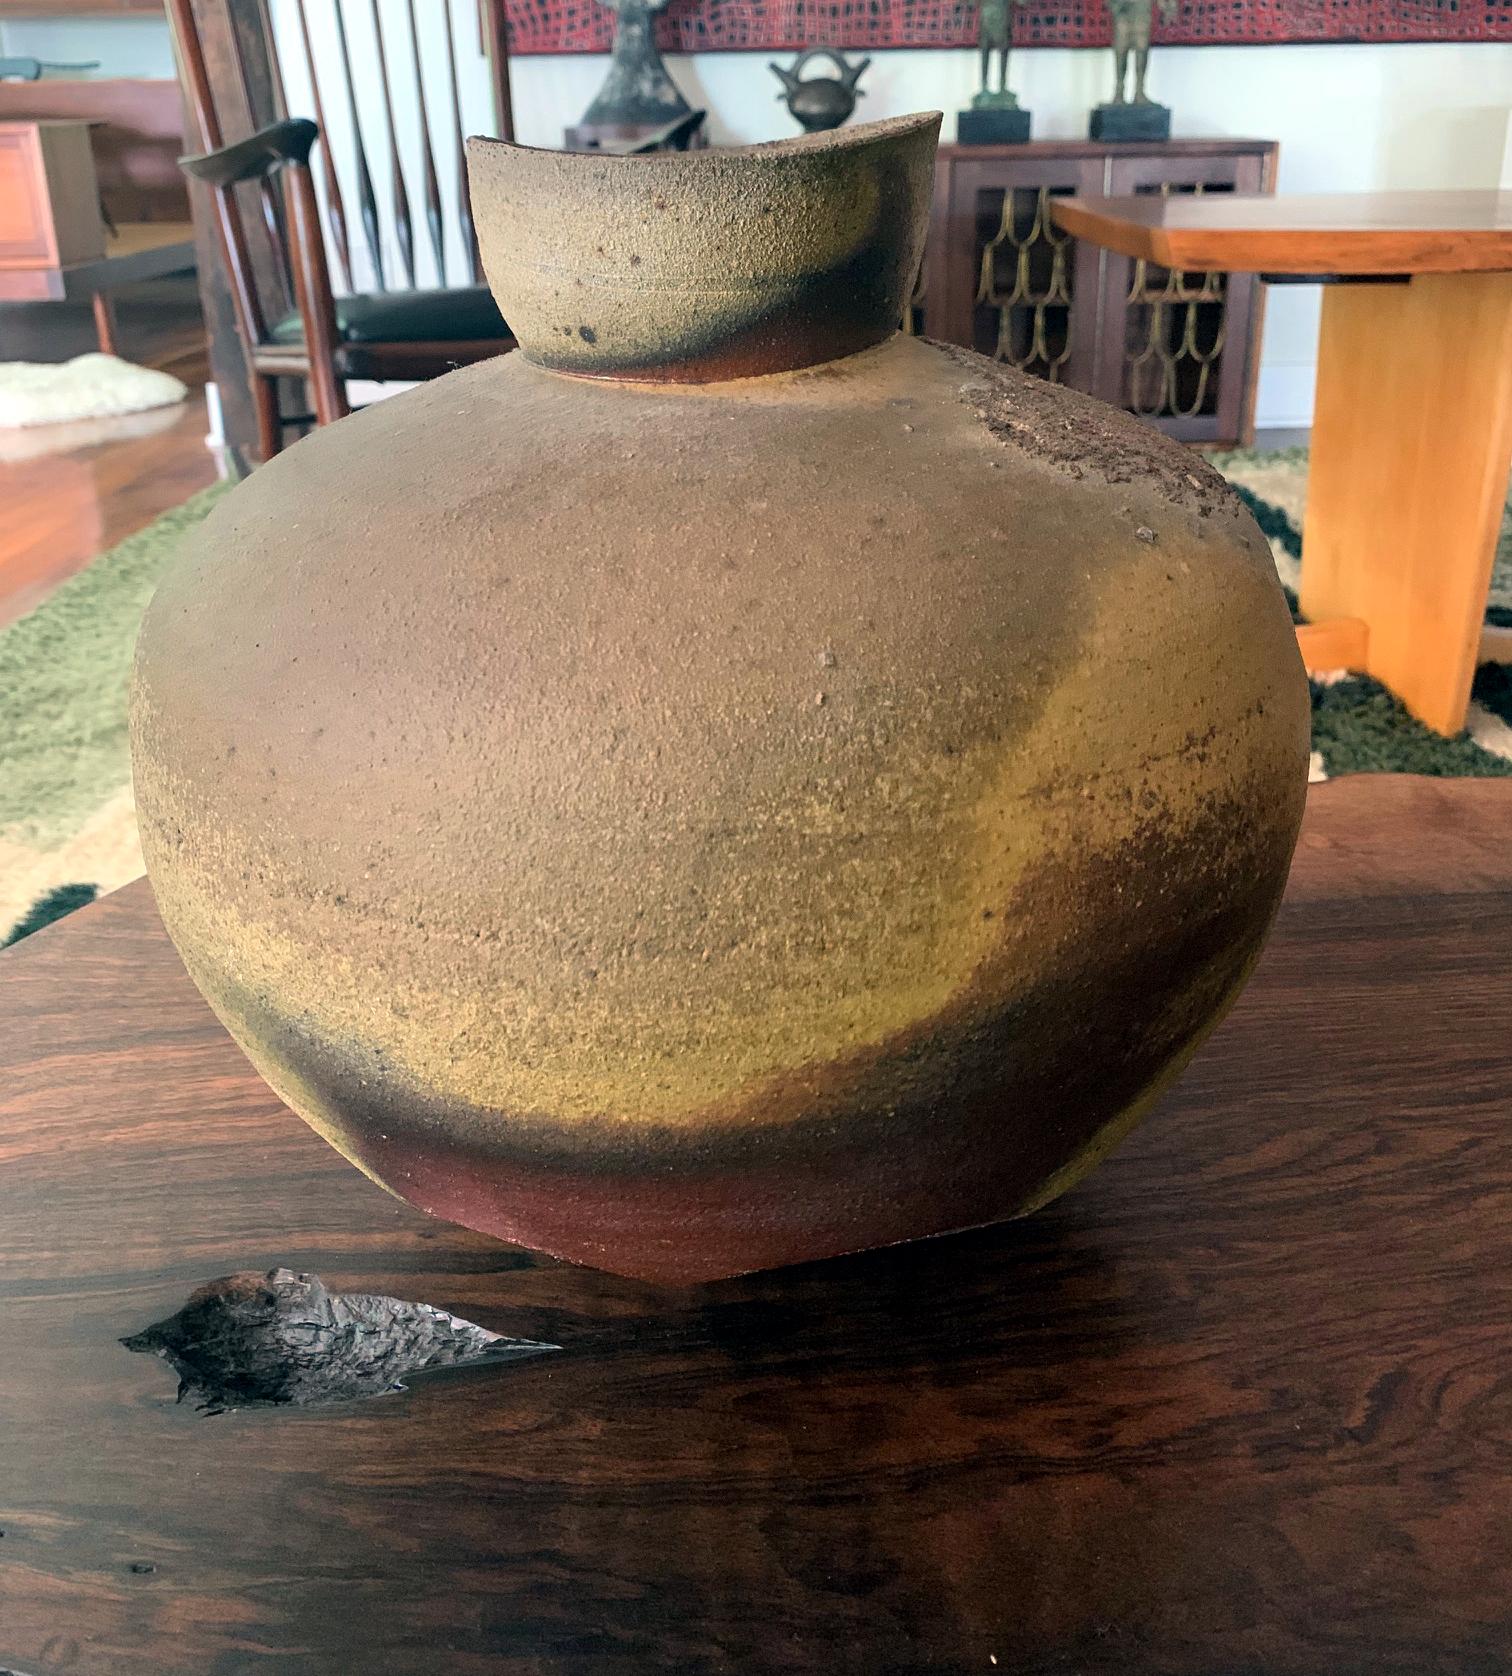 A large stoneware jar by Paul Chaleff (1947-) made in 1987 and was purchased directly from the artist's studio in New York. Wood fired ceramic vessel with handcut lower body and pronounced surface firing marks and ash glaze. It is marked with the